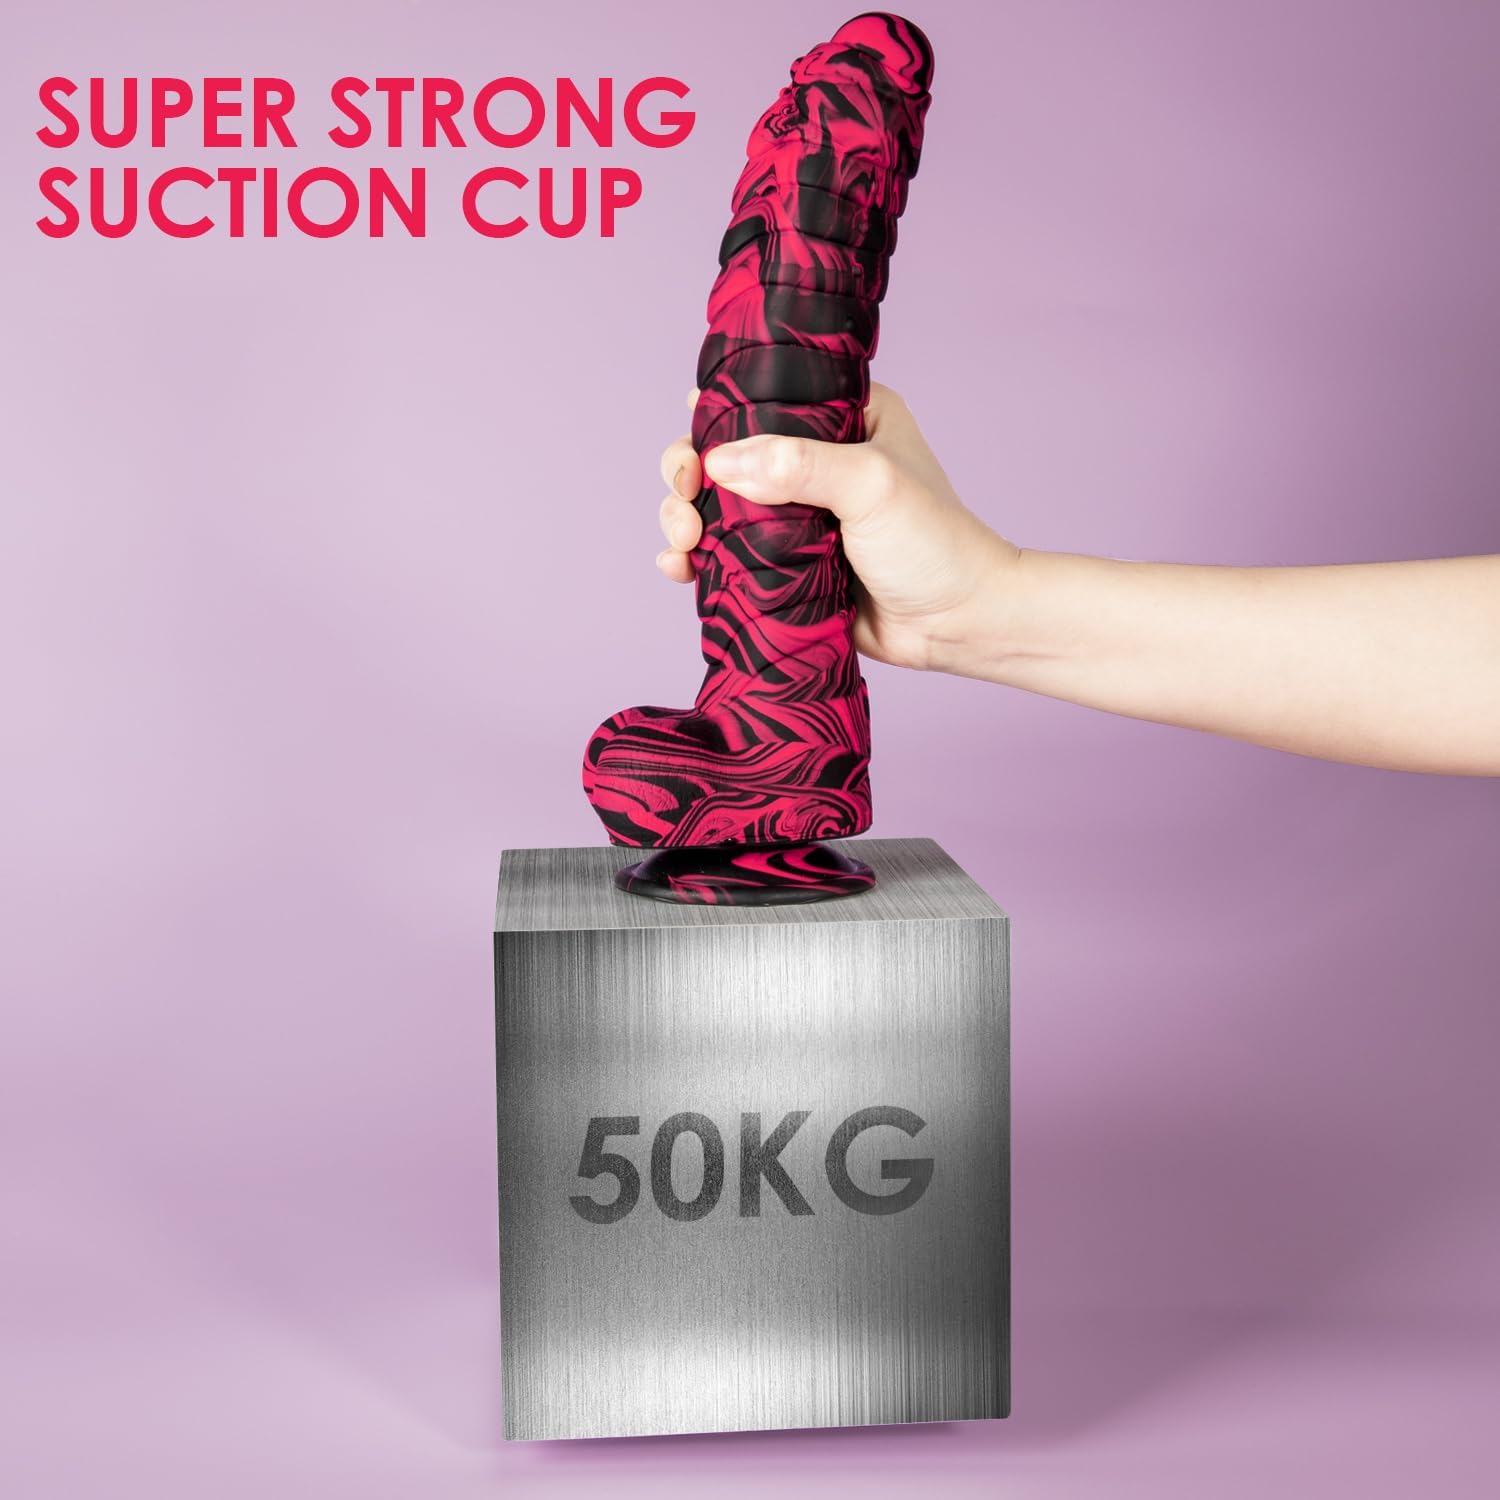 8.26 inch Huge Realistic Dildo - Colorful Dildo with Strong Suction Cup for Hands